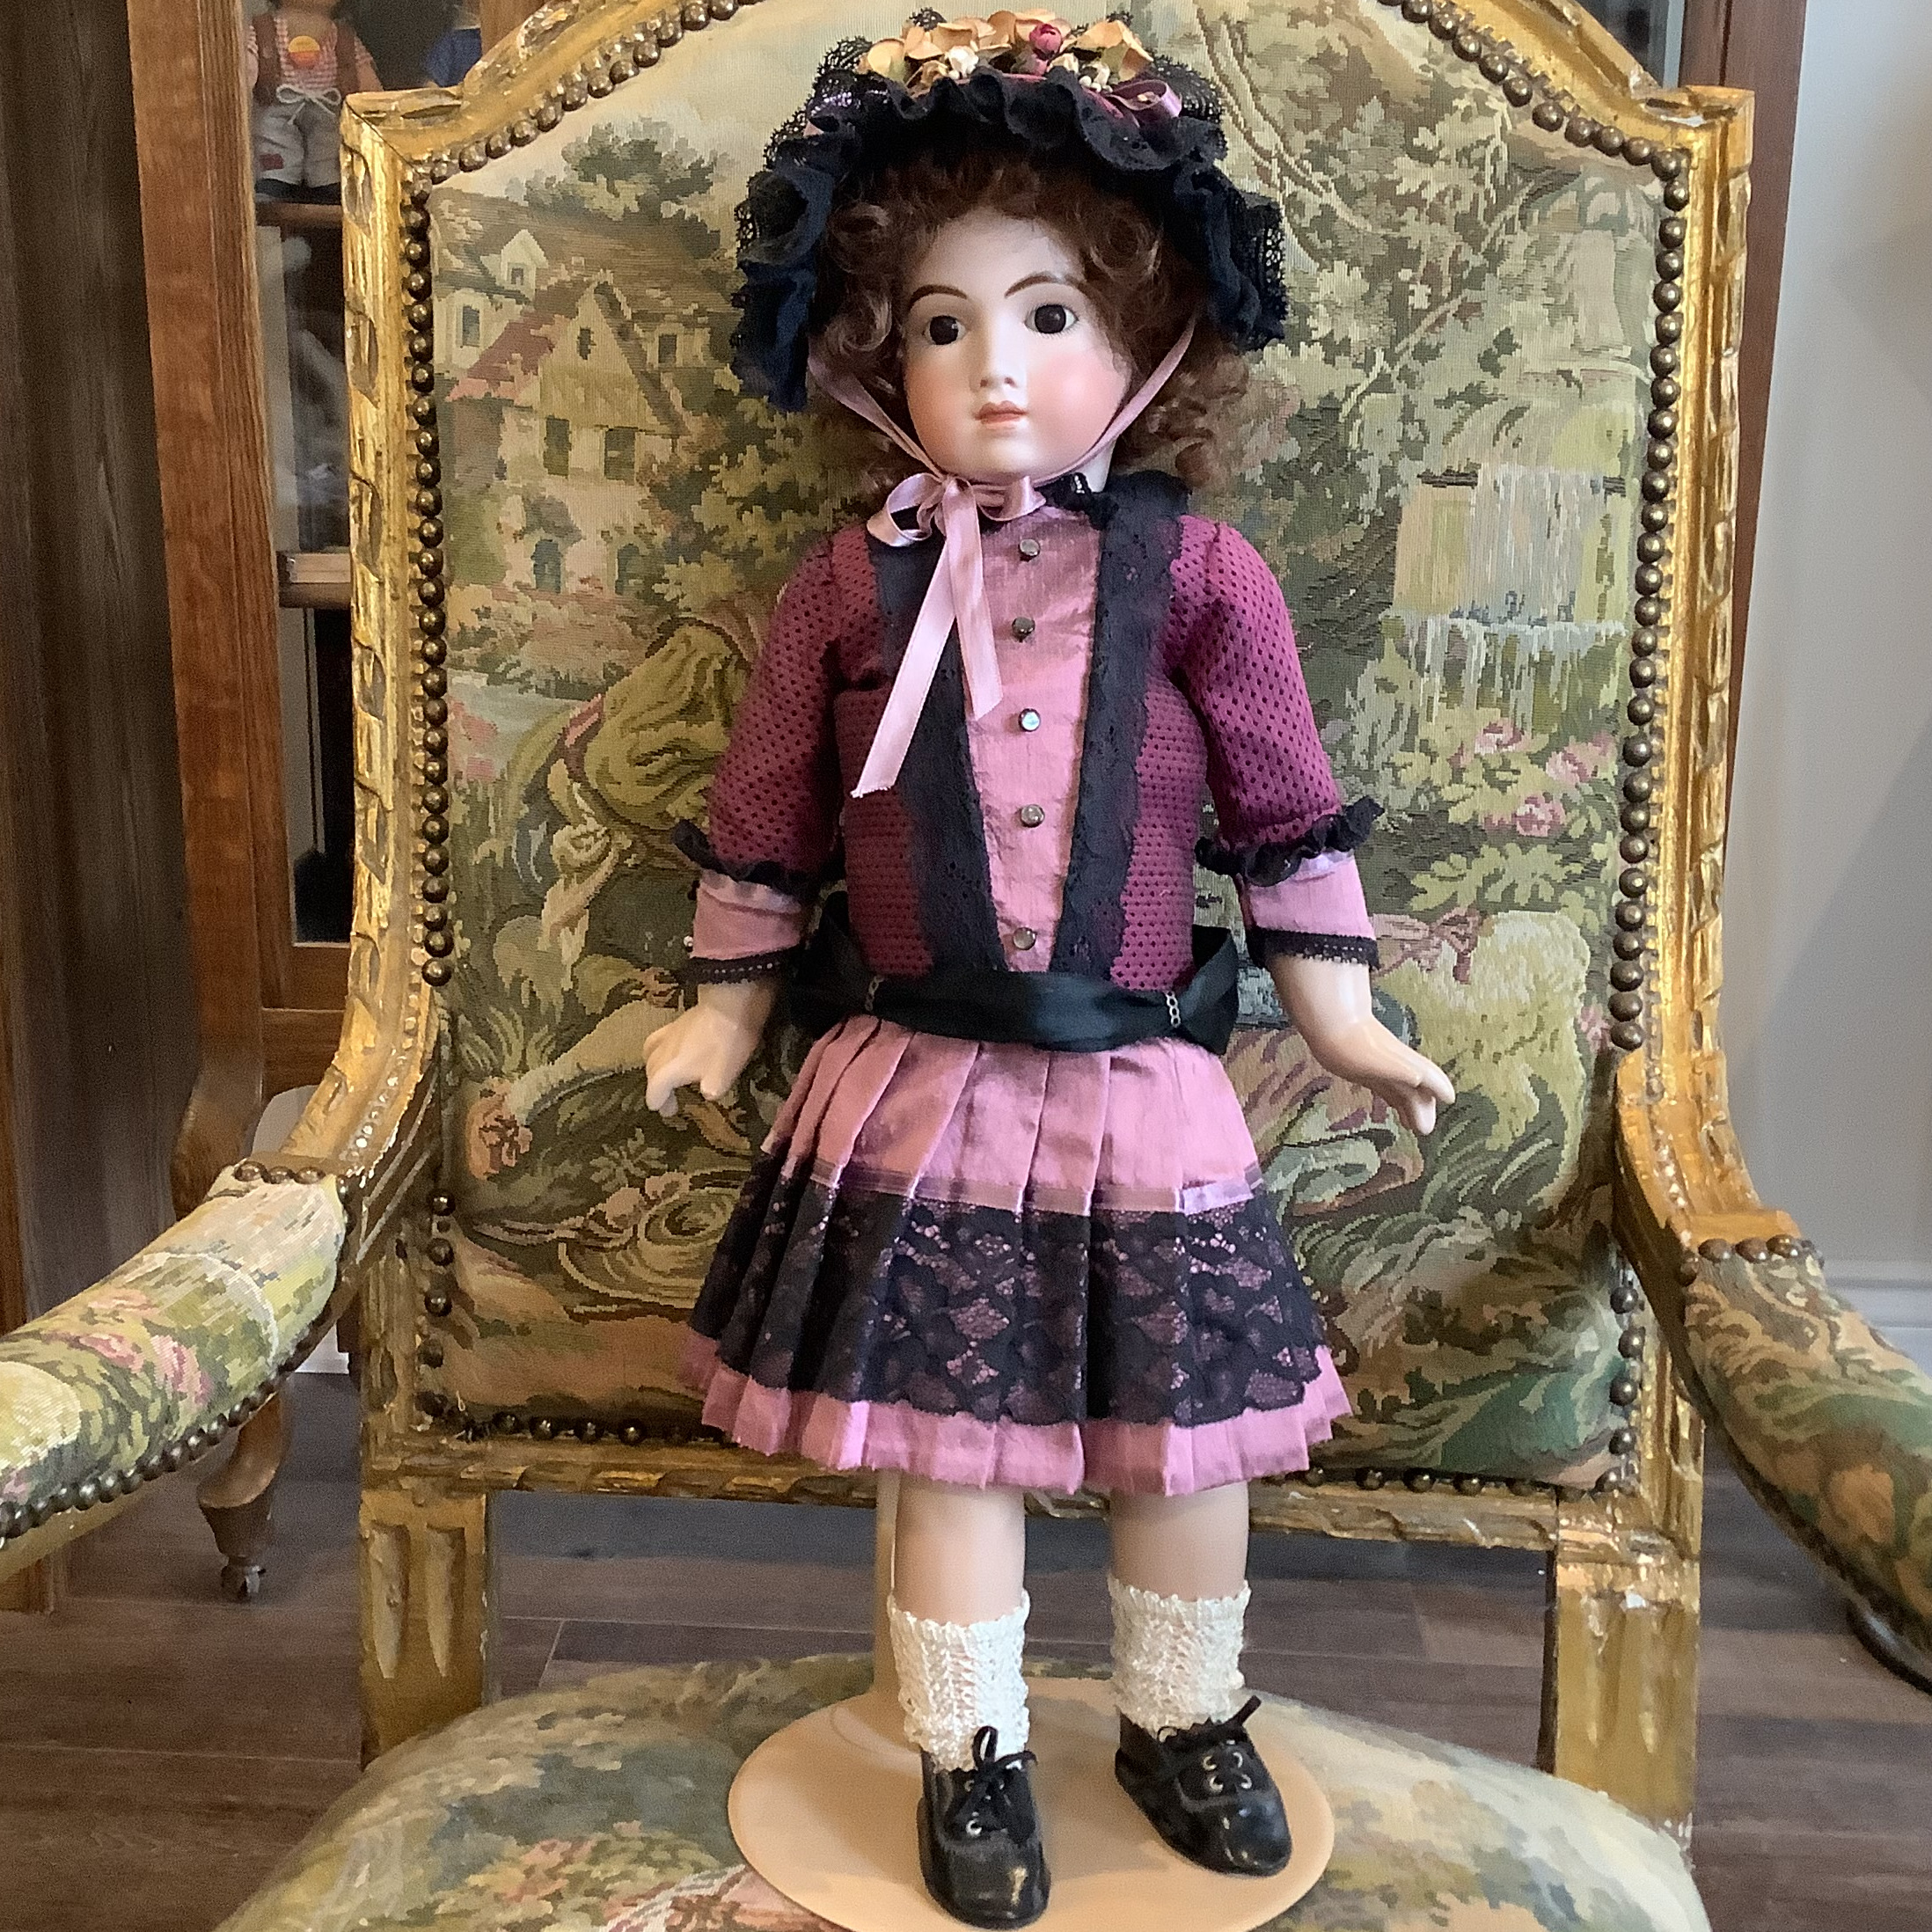 23 inch reproduction of AT 11 doll with light skin, curly brown shoulder-length hair, and pink and black suit